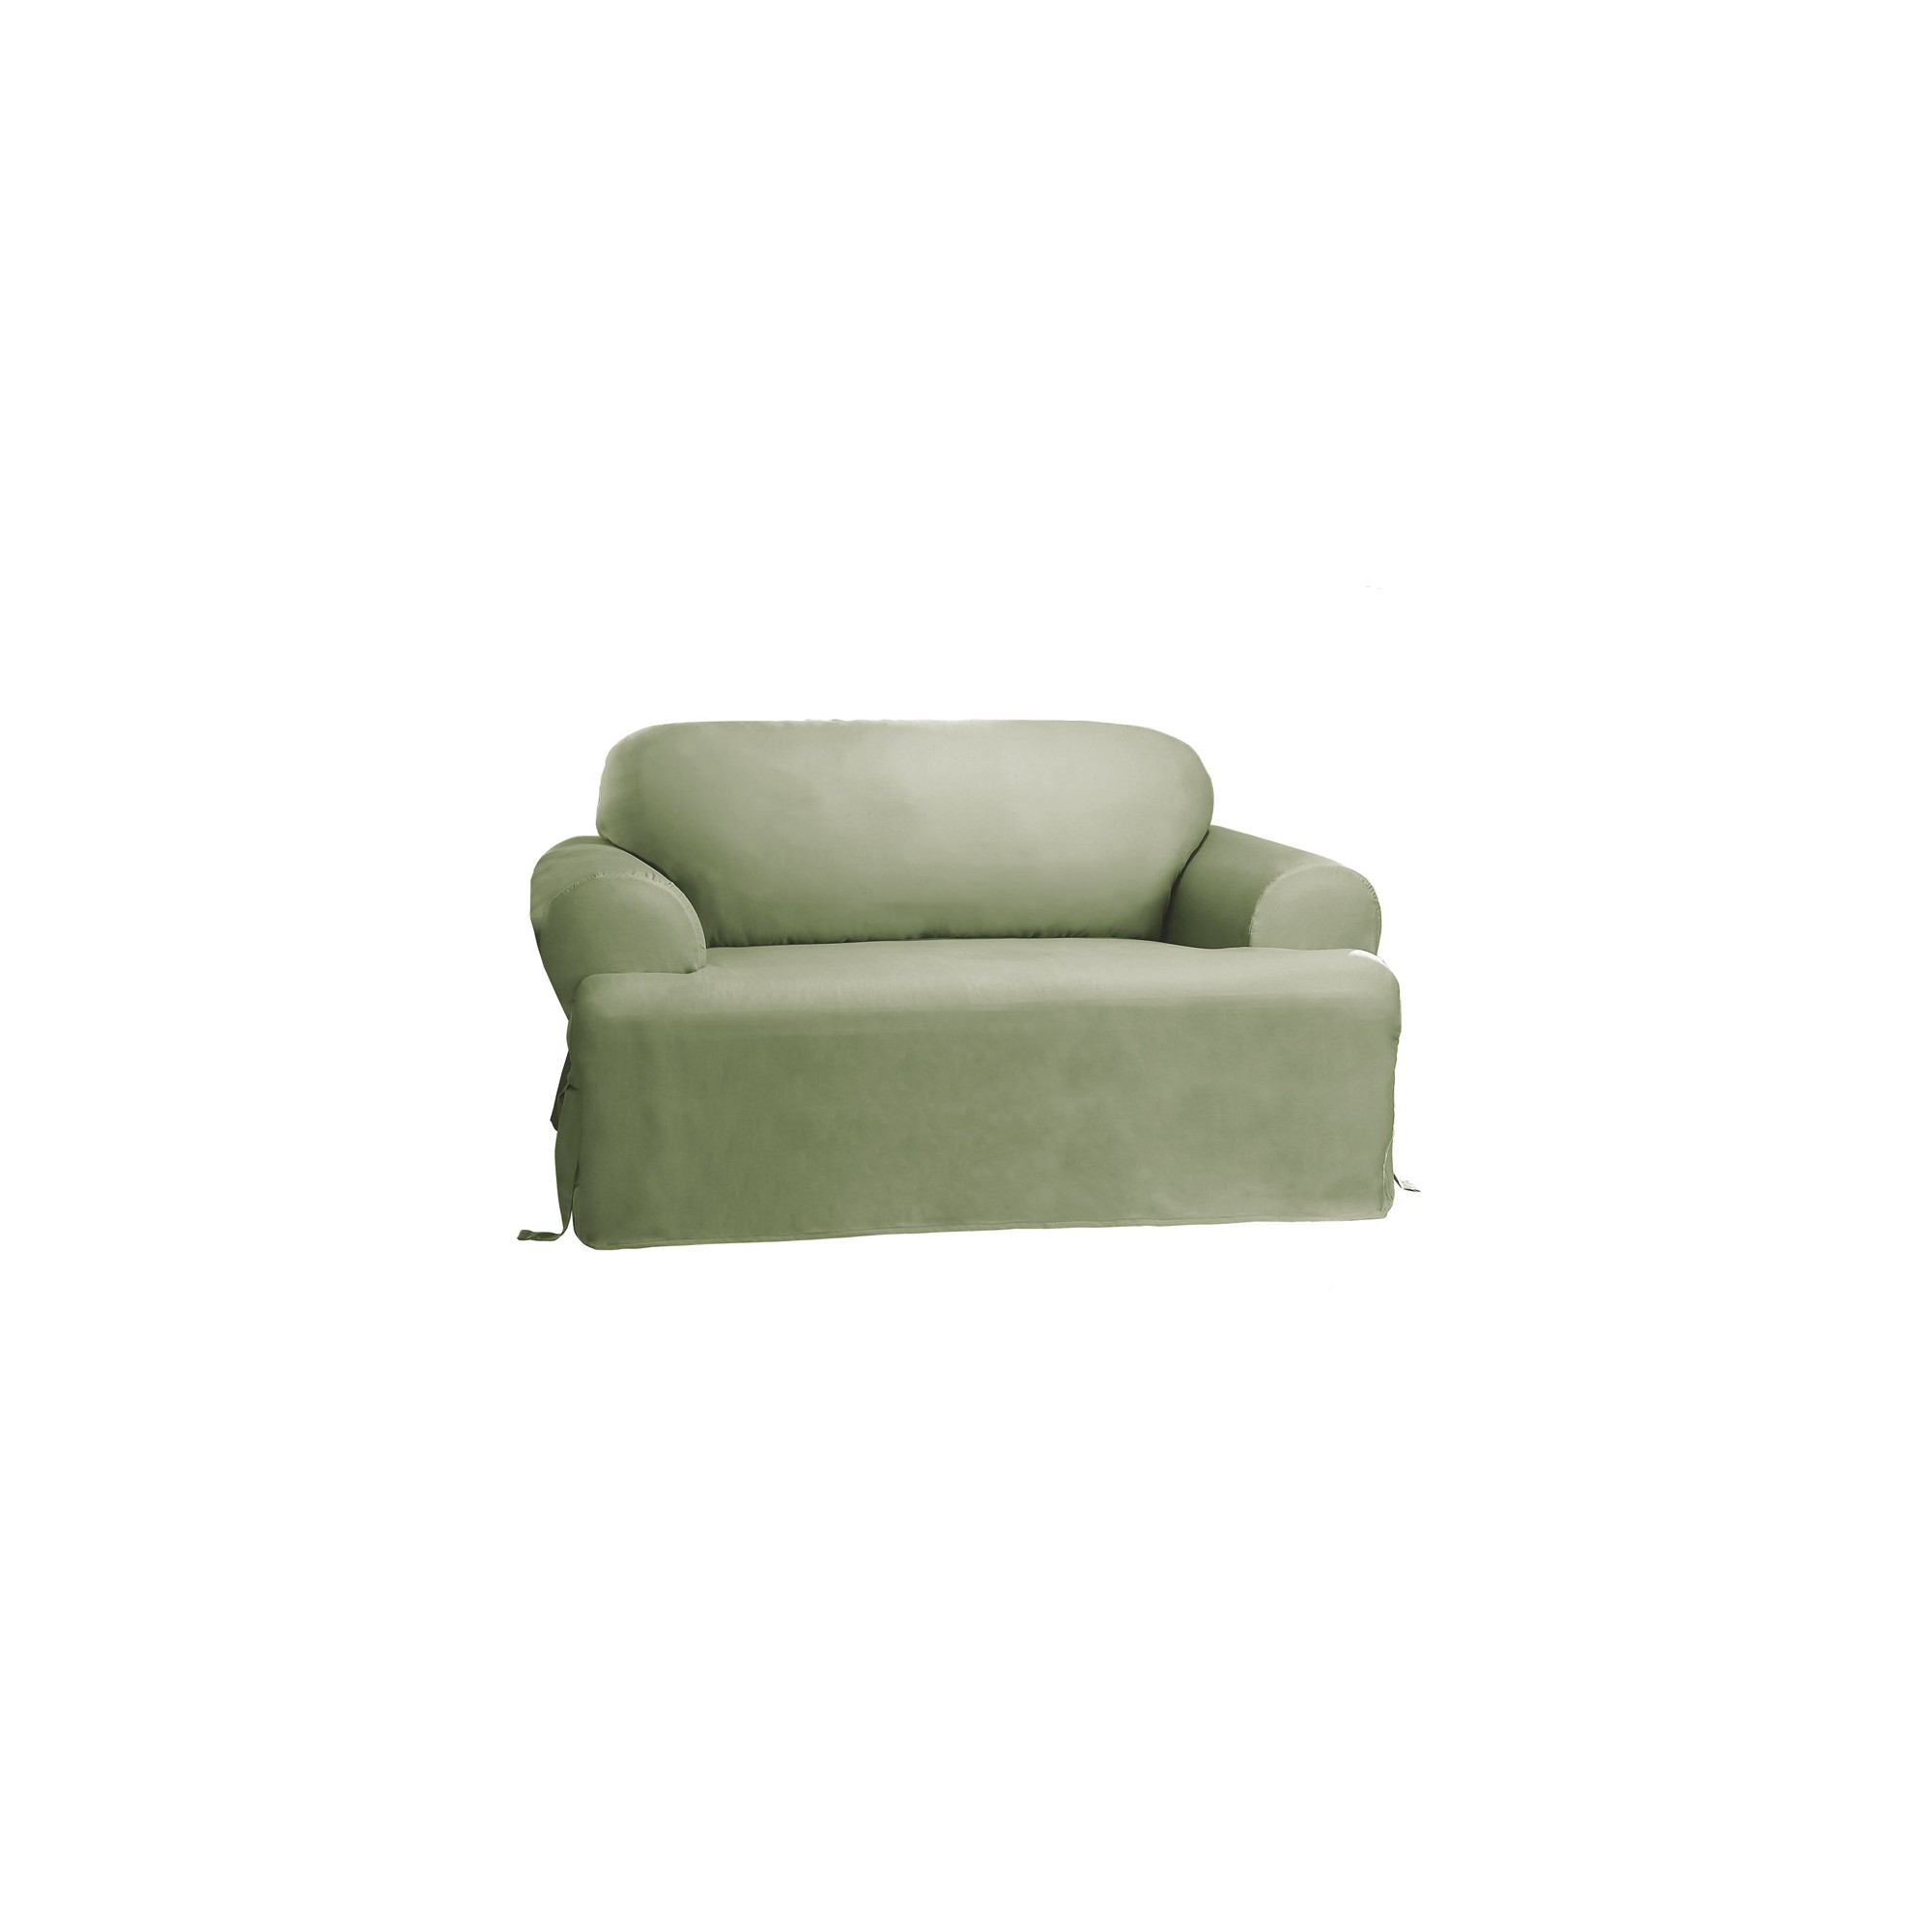 Cotton Duck Tcushion Loveseat Slipcover Sage Green - Sure Fit